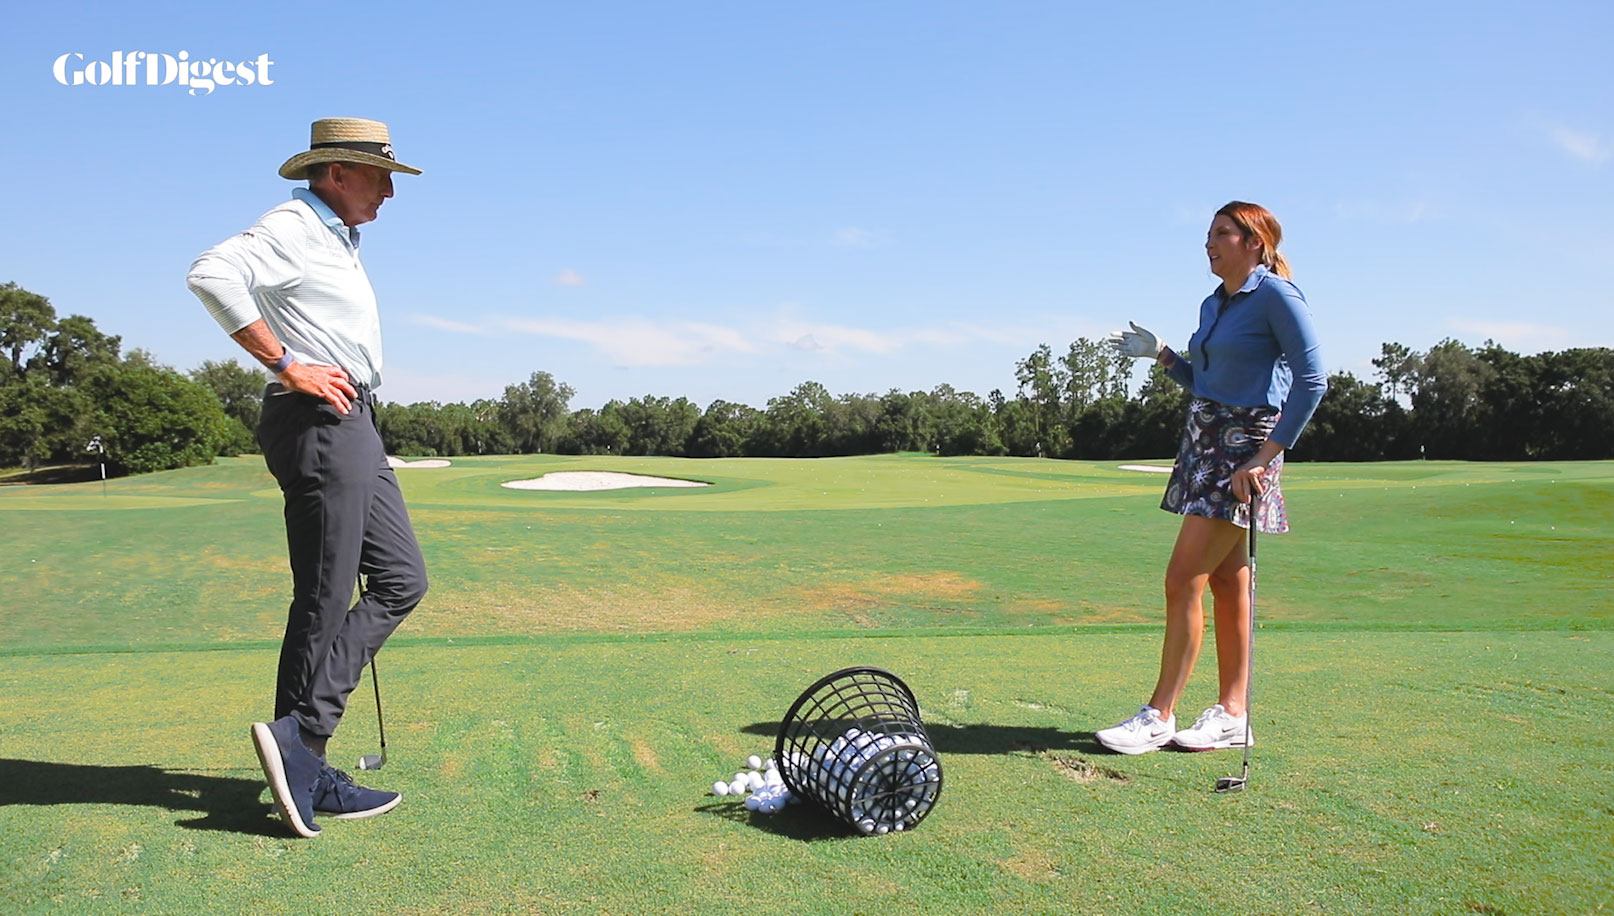 and David Leadbetter Q&A presented by WHOOP | Golf Equipment: Clubs, Balls, Bags